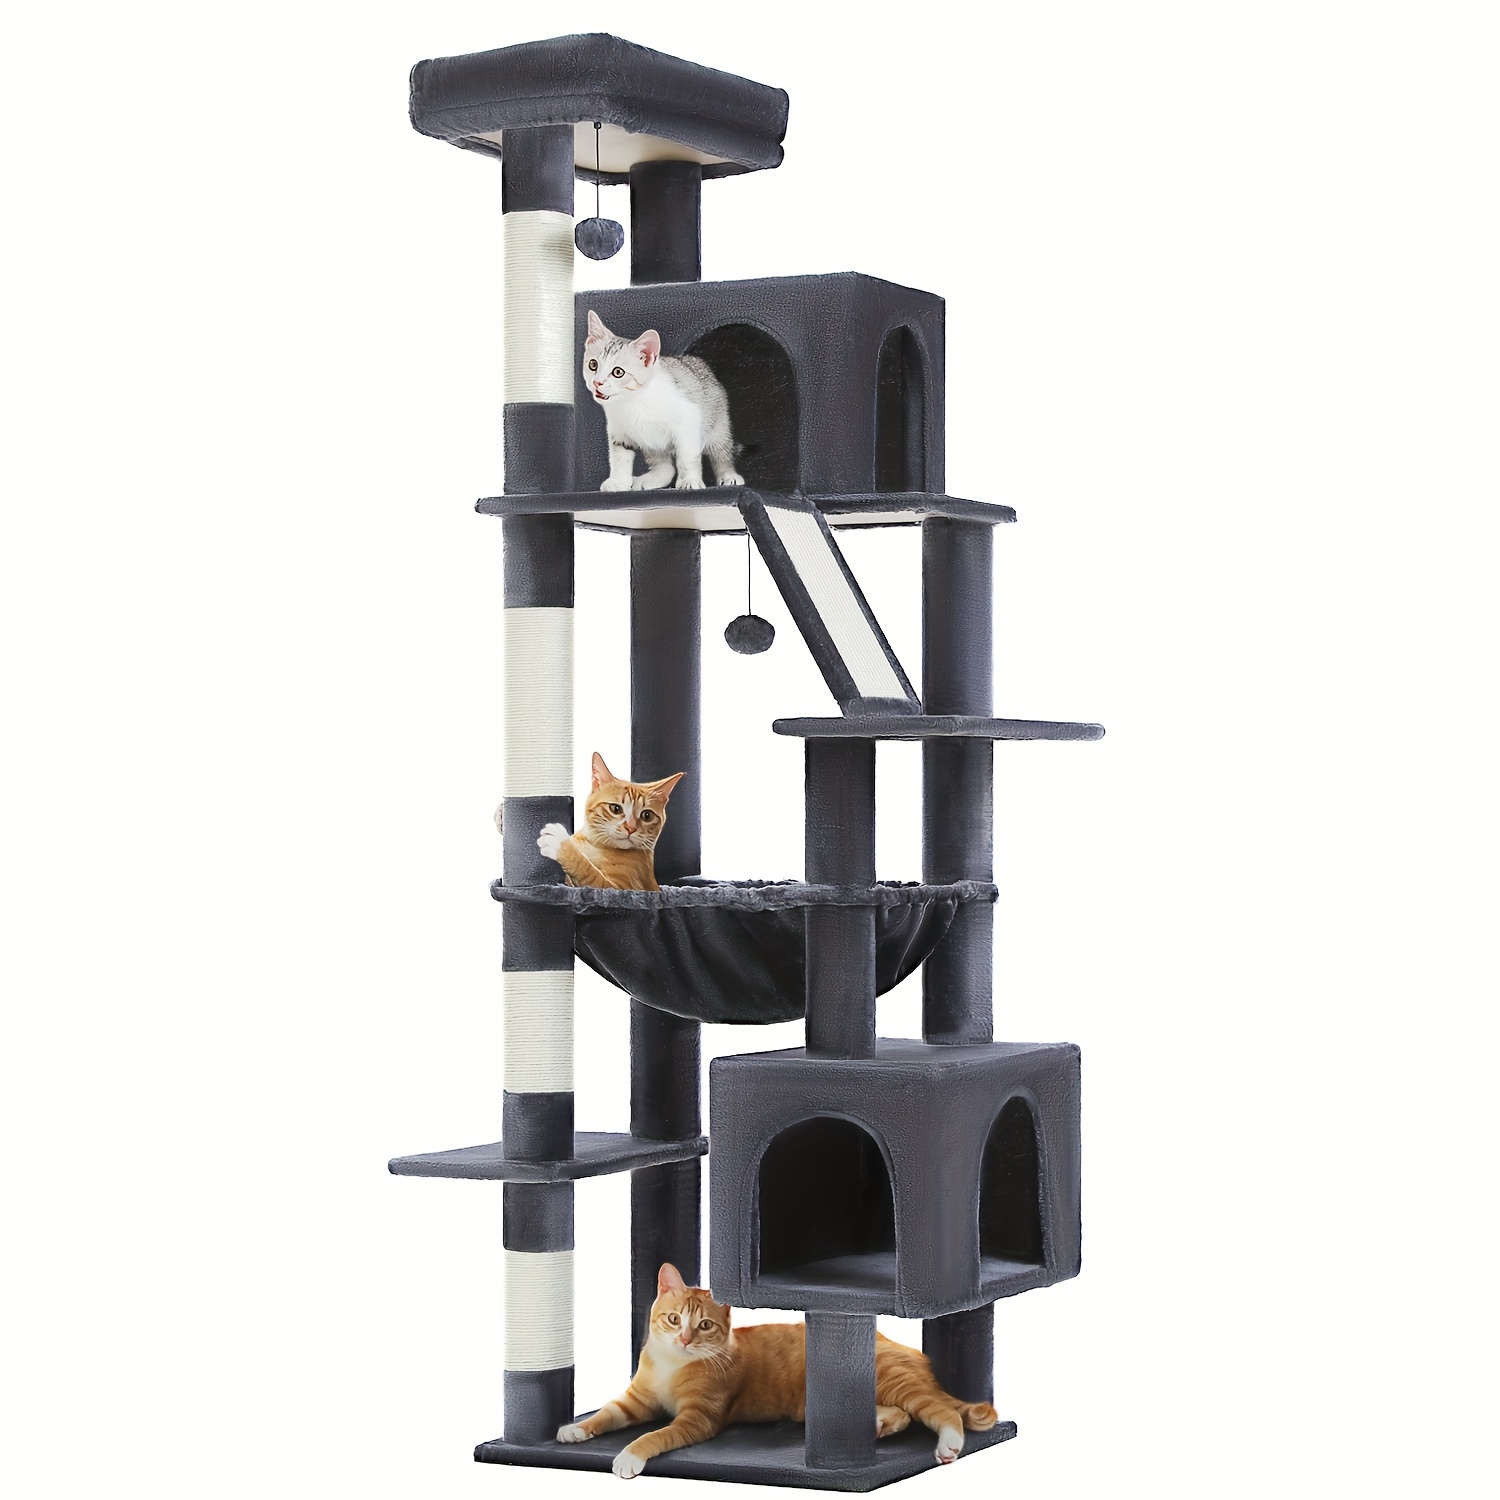 

Cat Tree, 71-inch Cat Tree Cat Tower For Indoor Cats, Plush Multi-level Cat Condo With 1 Perches, Basket, 2 Caves, Hammock, 2 Pompoms, Dark Grey/ Light Grey/ Beige/ Green/ Pink